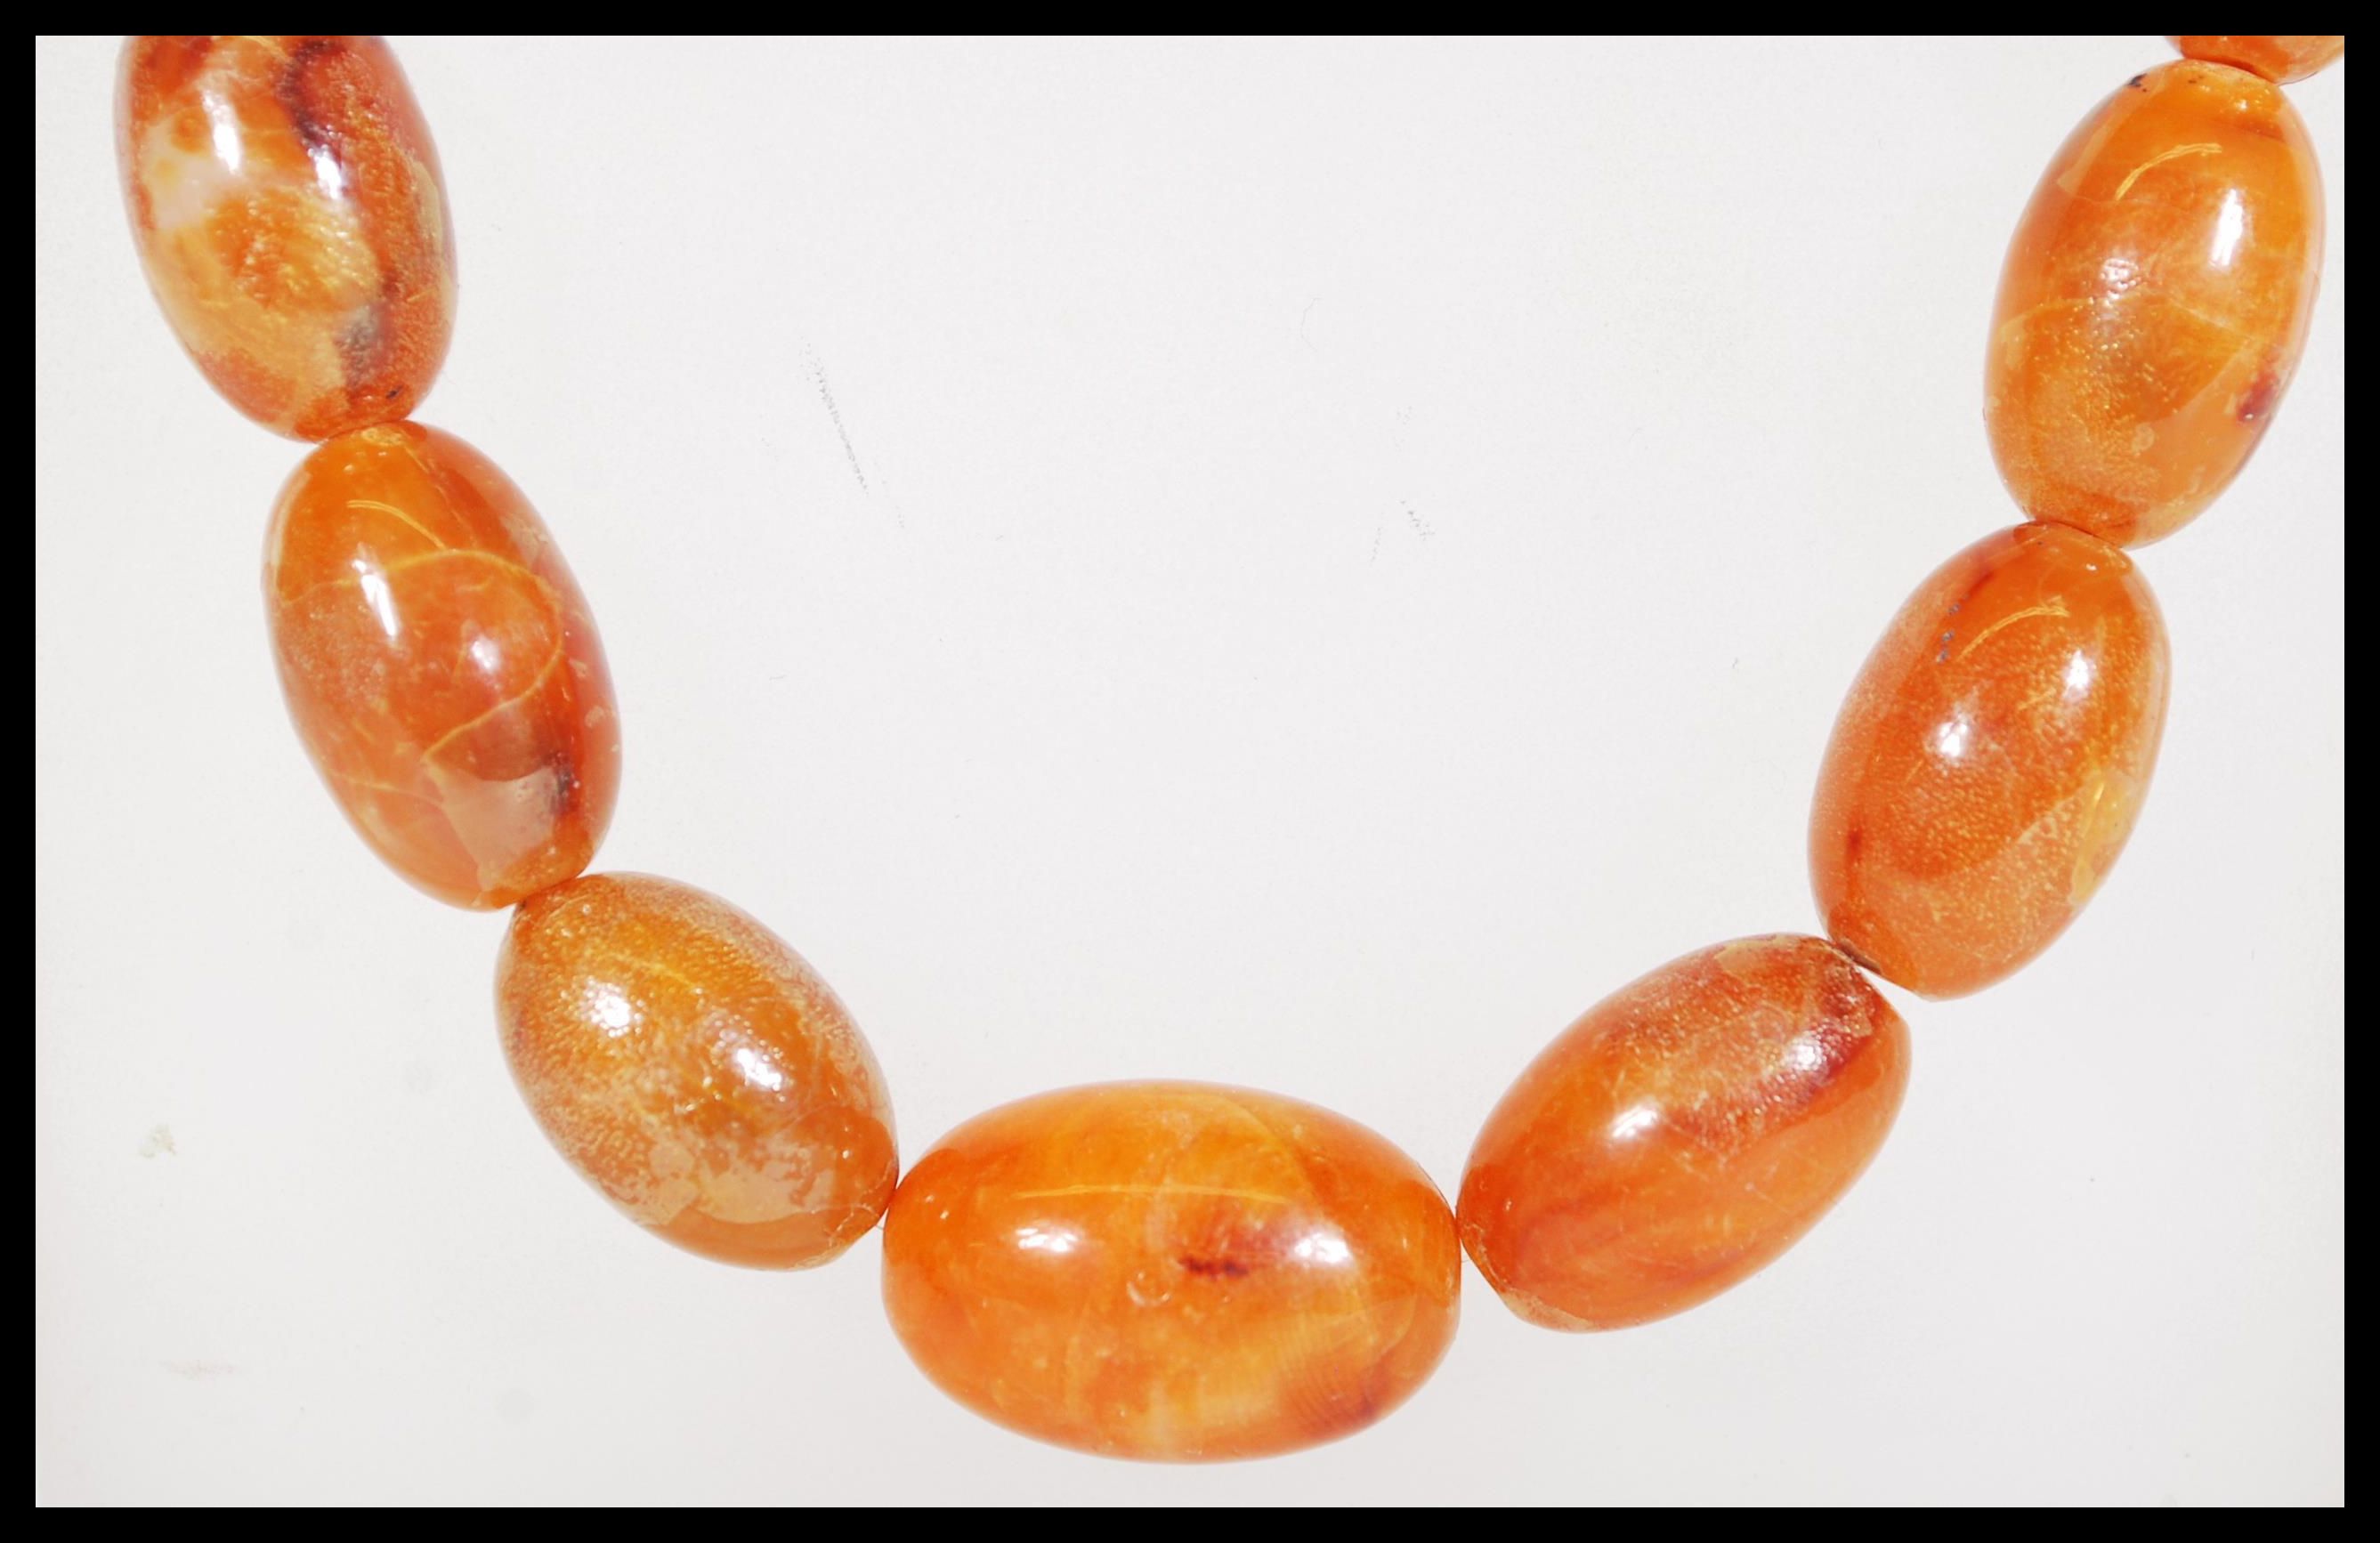 A vintage amber / faux amber Chinese prayer bead n